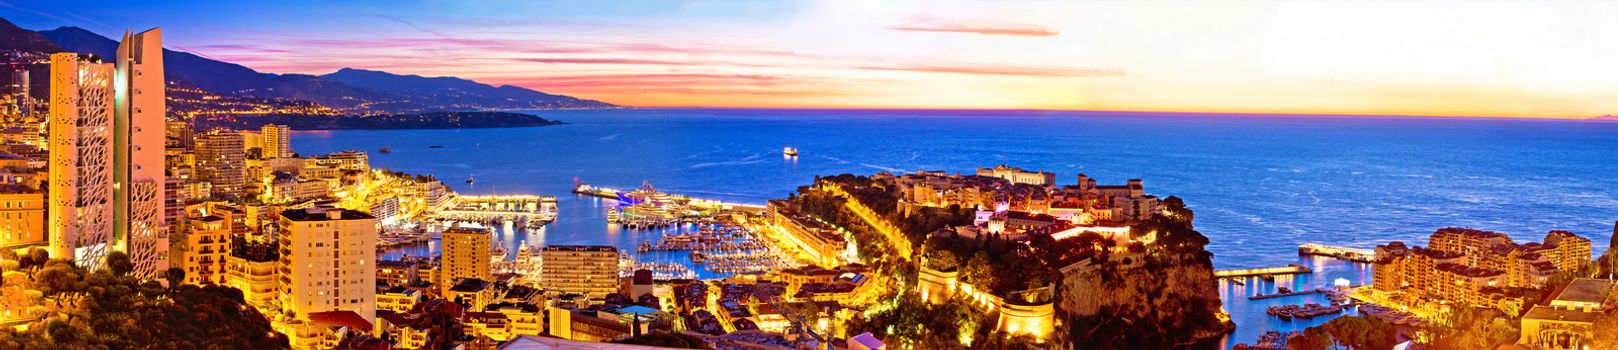 Monte Carlo cityscape colorful evening panoramic view from above, Principality of Monaco